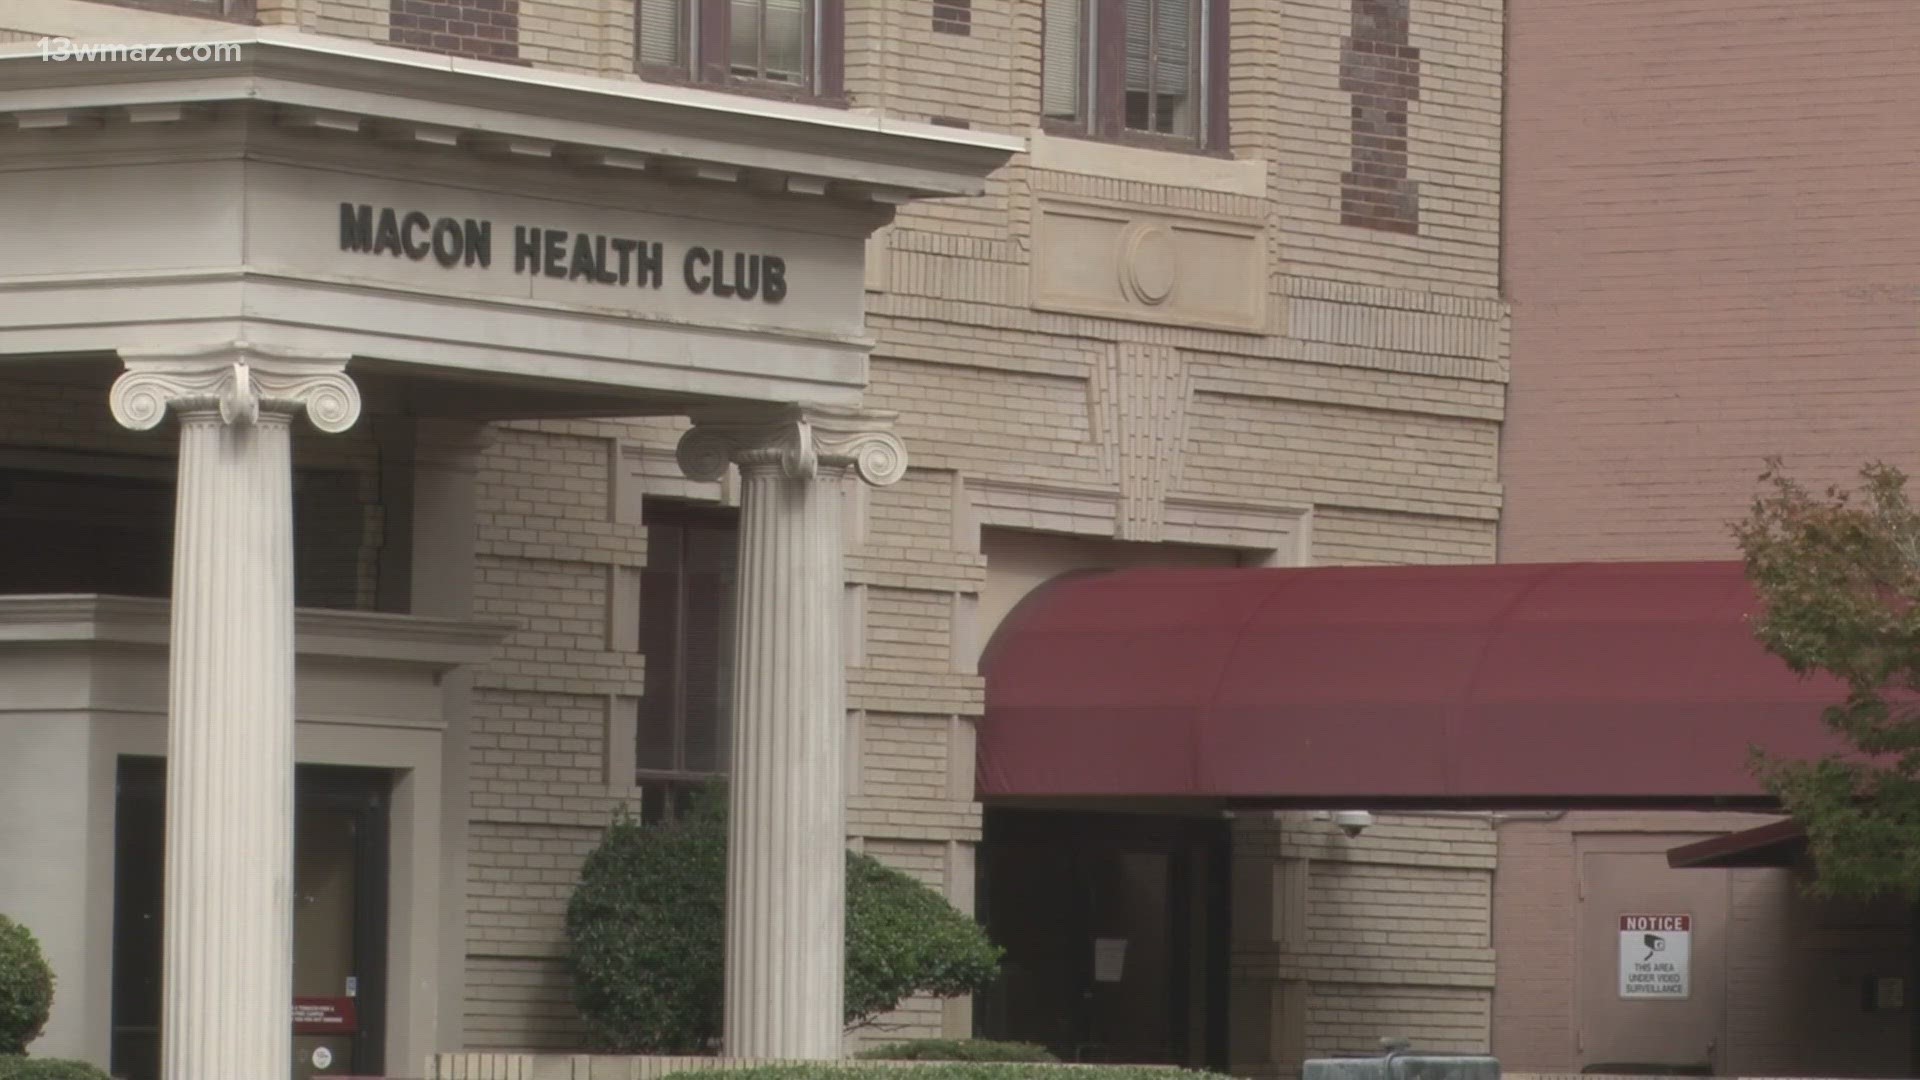 Macon-Bibb's Urban Development Authority said revitalization plans for the club have been a long time coming. It was acquired in a land swap.